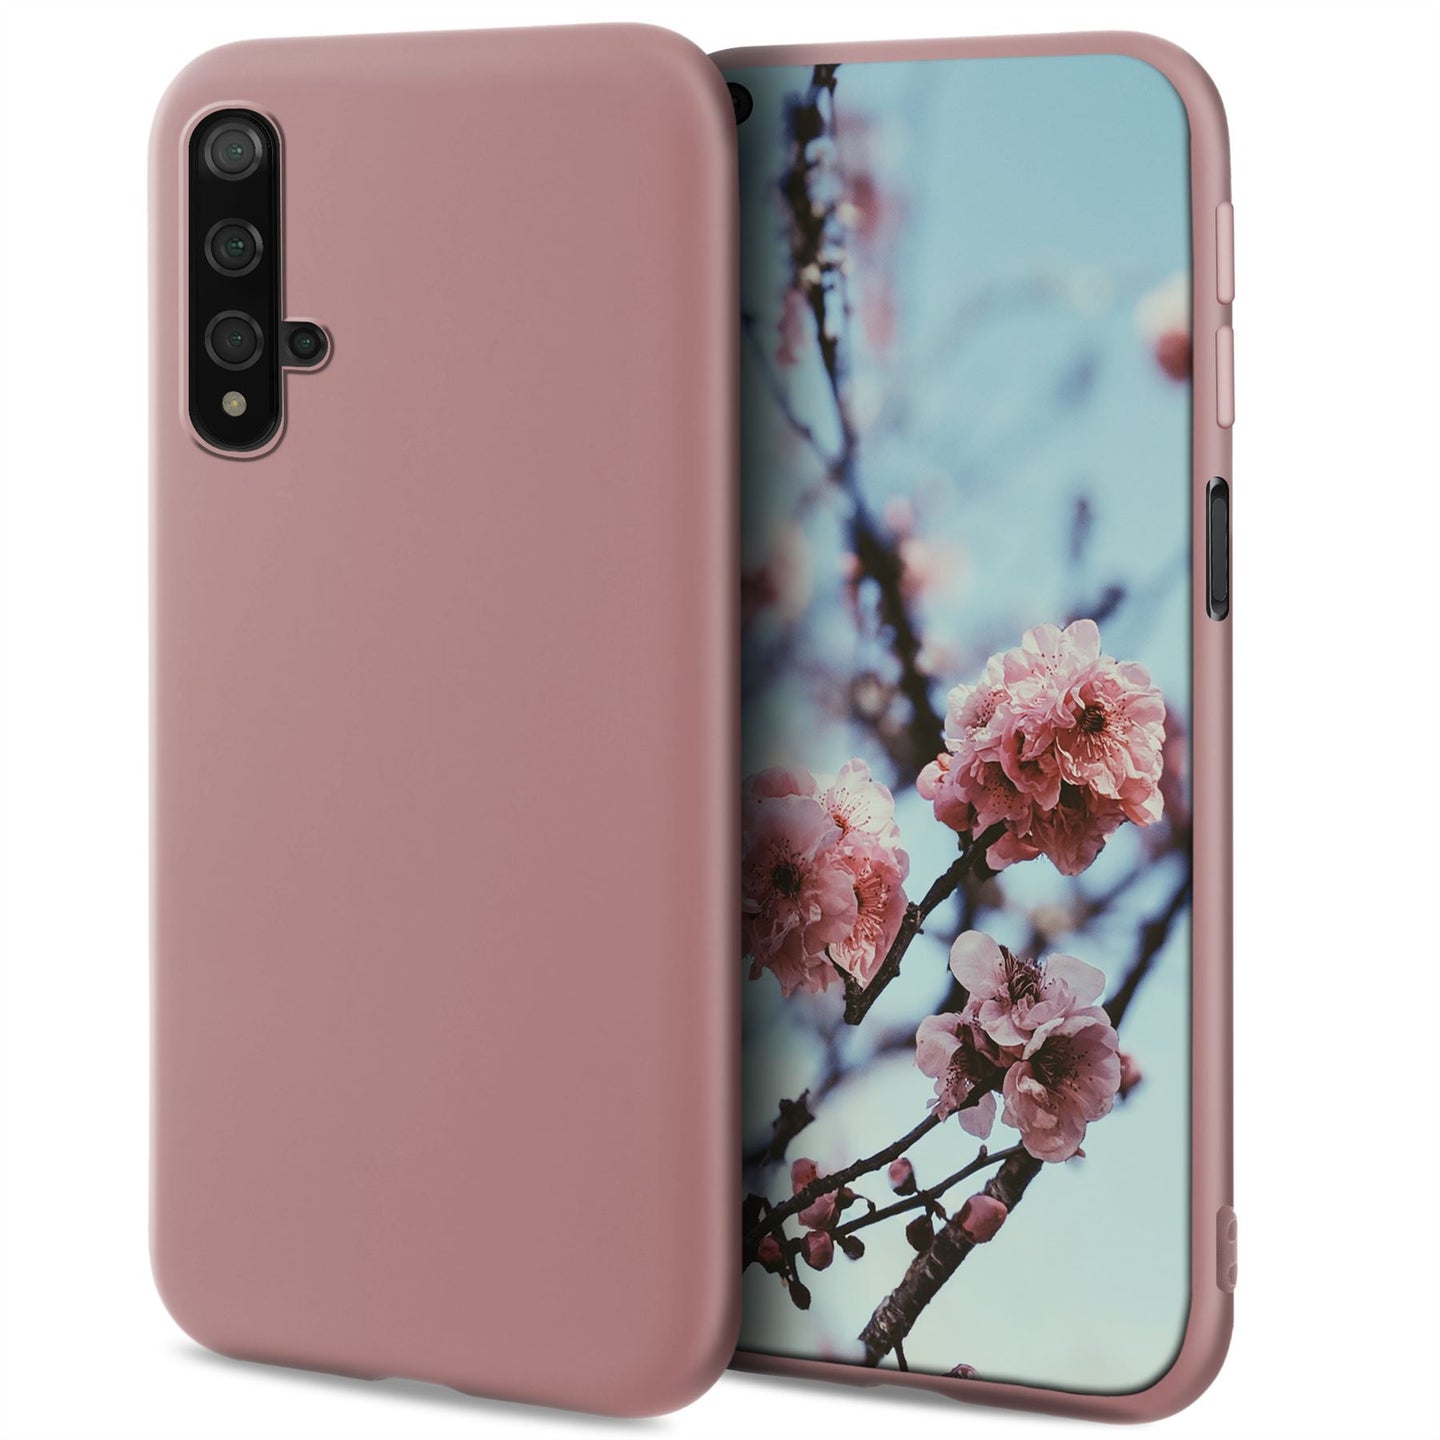 Moozy Minimalist Series Silicone Case for Huawei Nova 5T and Honor 20, Rose Beige - Matte Finish Slim Soft TPU Cover